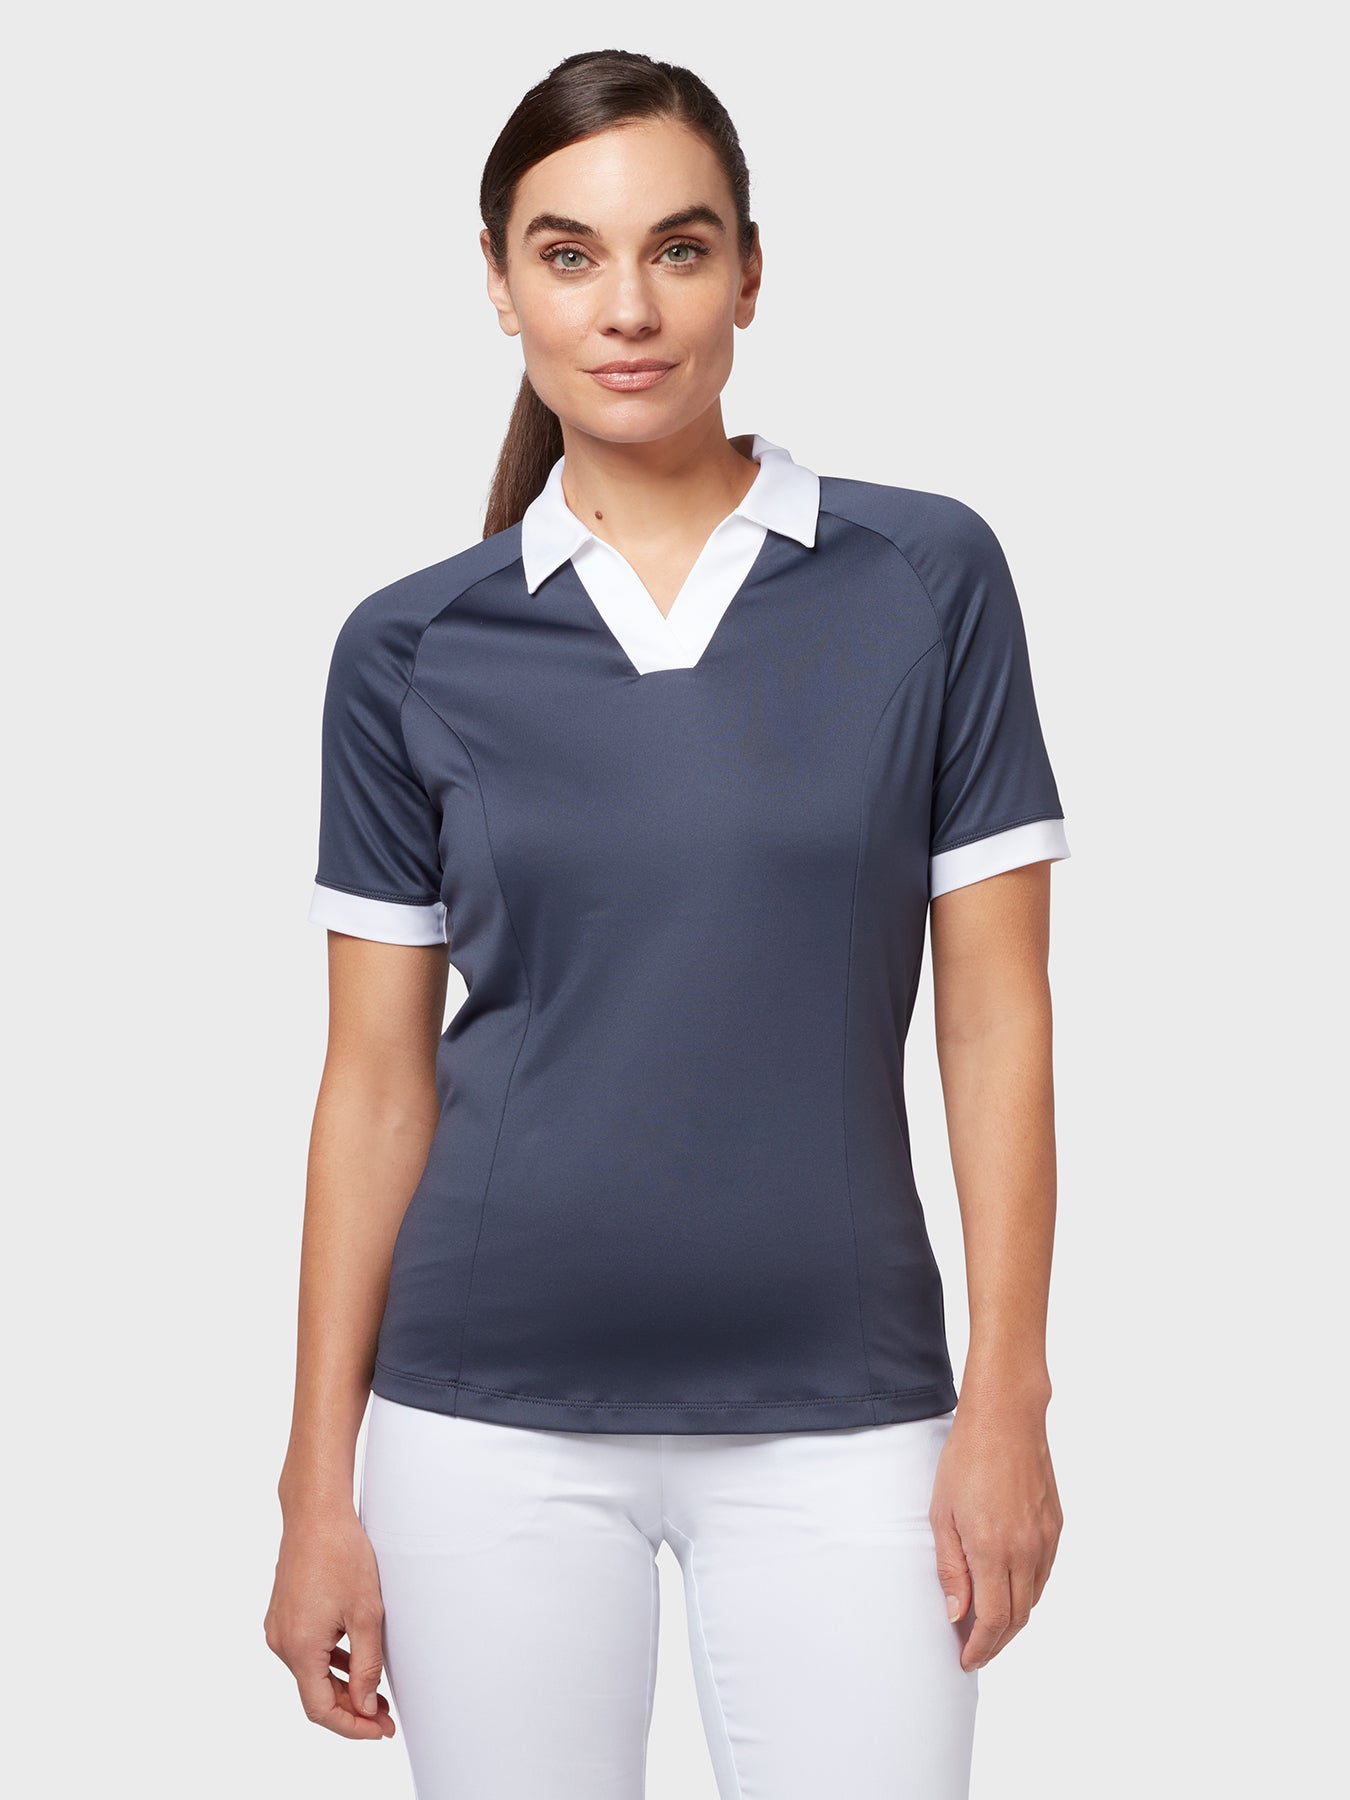 View VPlacket Colourblock Womens Polo In Odyssey Gray Odyssey Gray M information